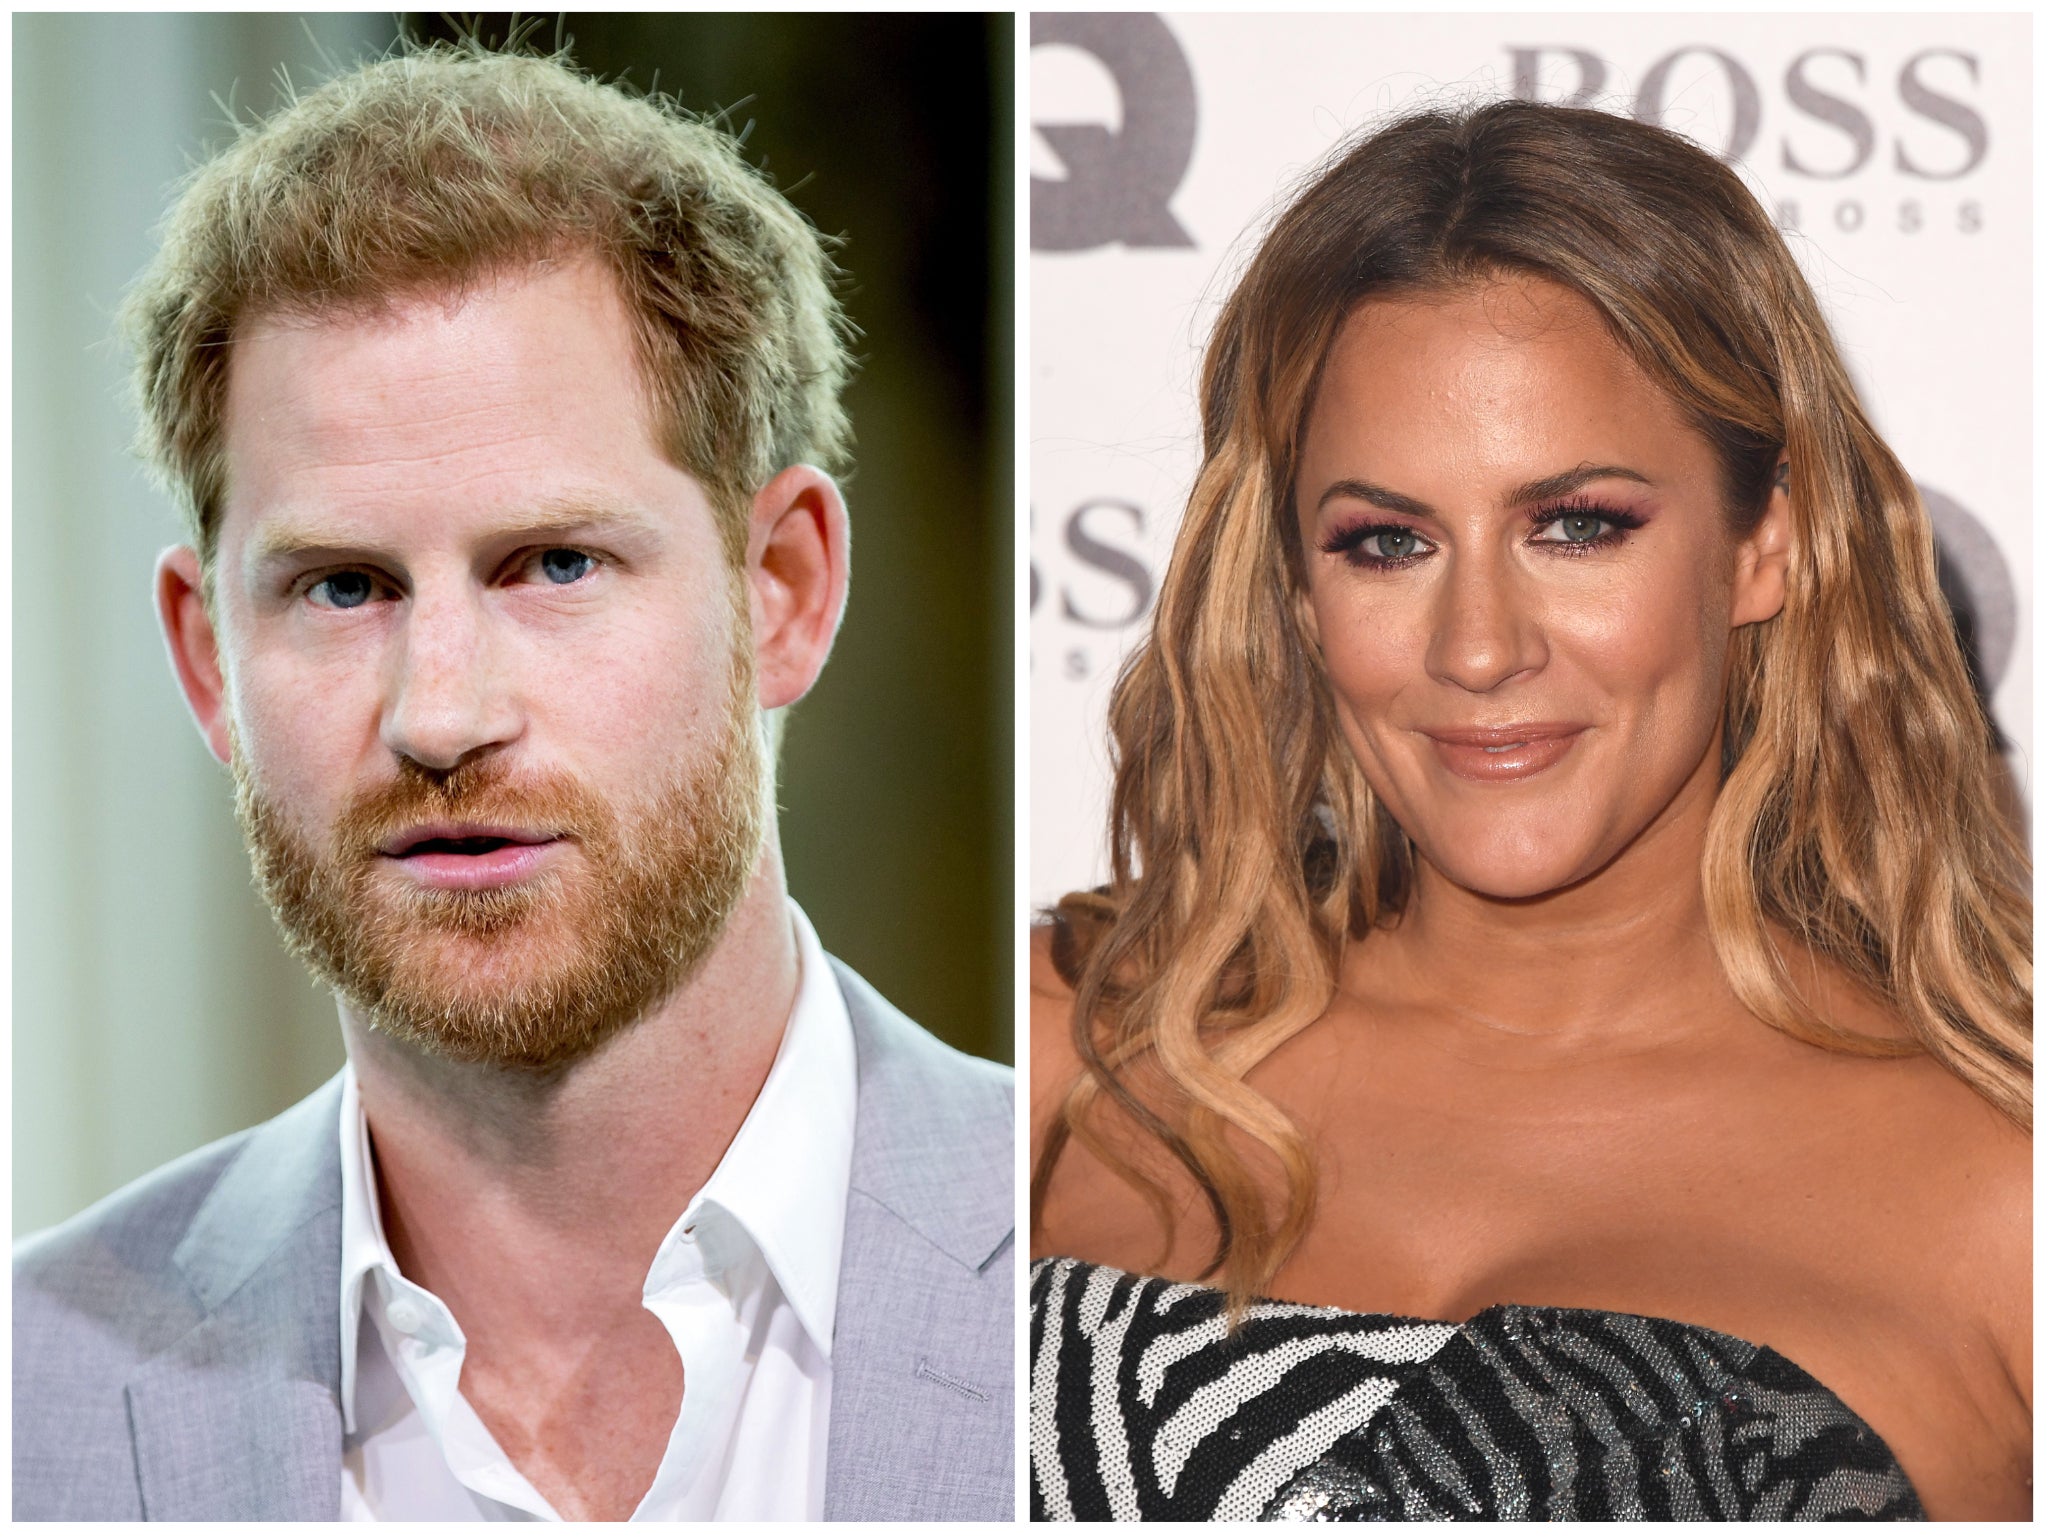 Prince Harry previously said that press intrusion had ‘tainted’ his relationship with Caroline Flack ‘irredeemably’